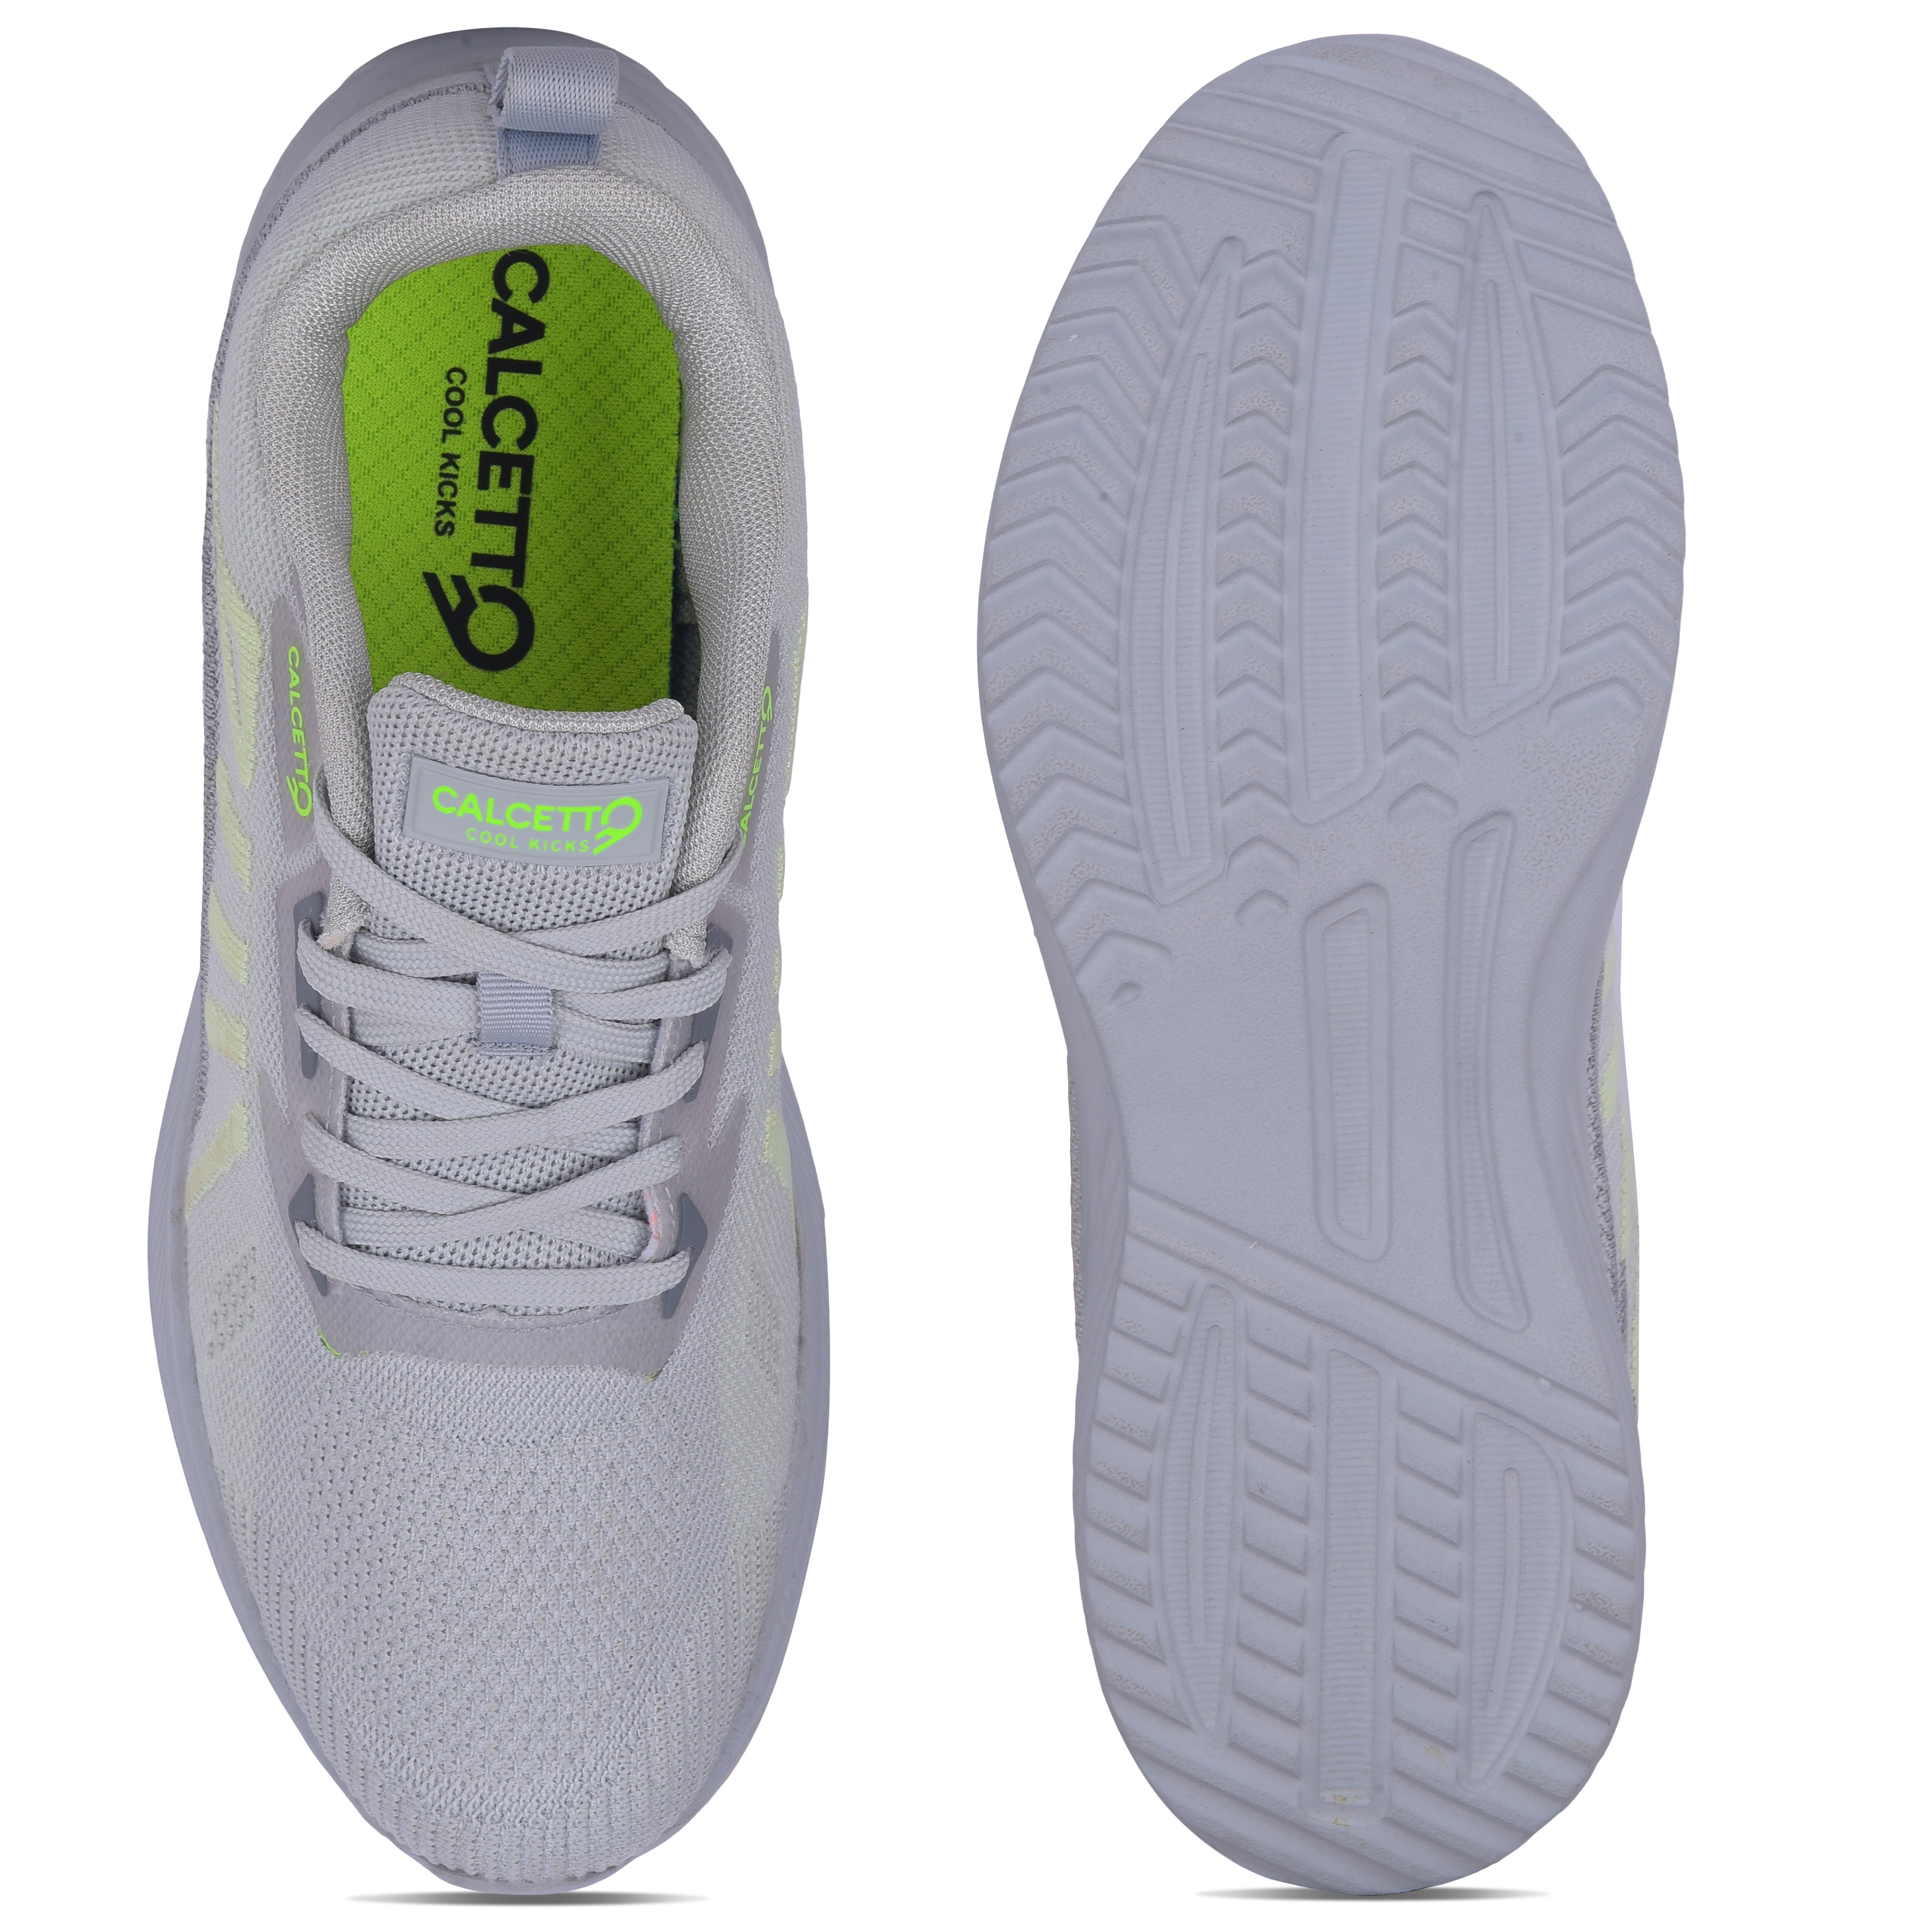 Calcetto CLT-2033 Grey Lime Casual Shoe For Men